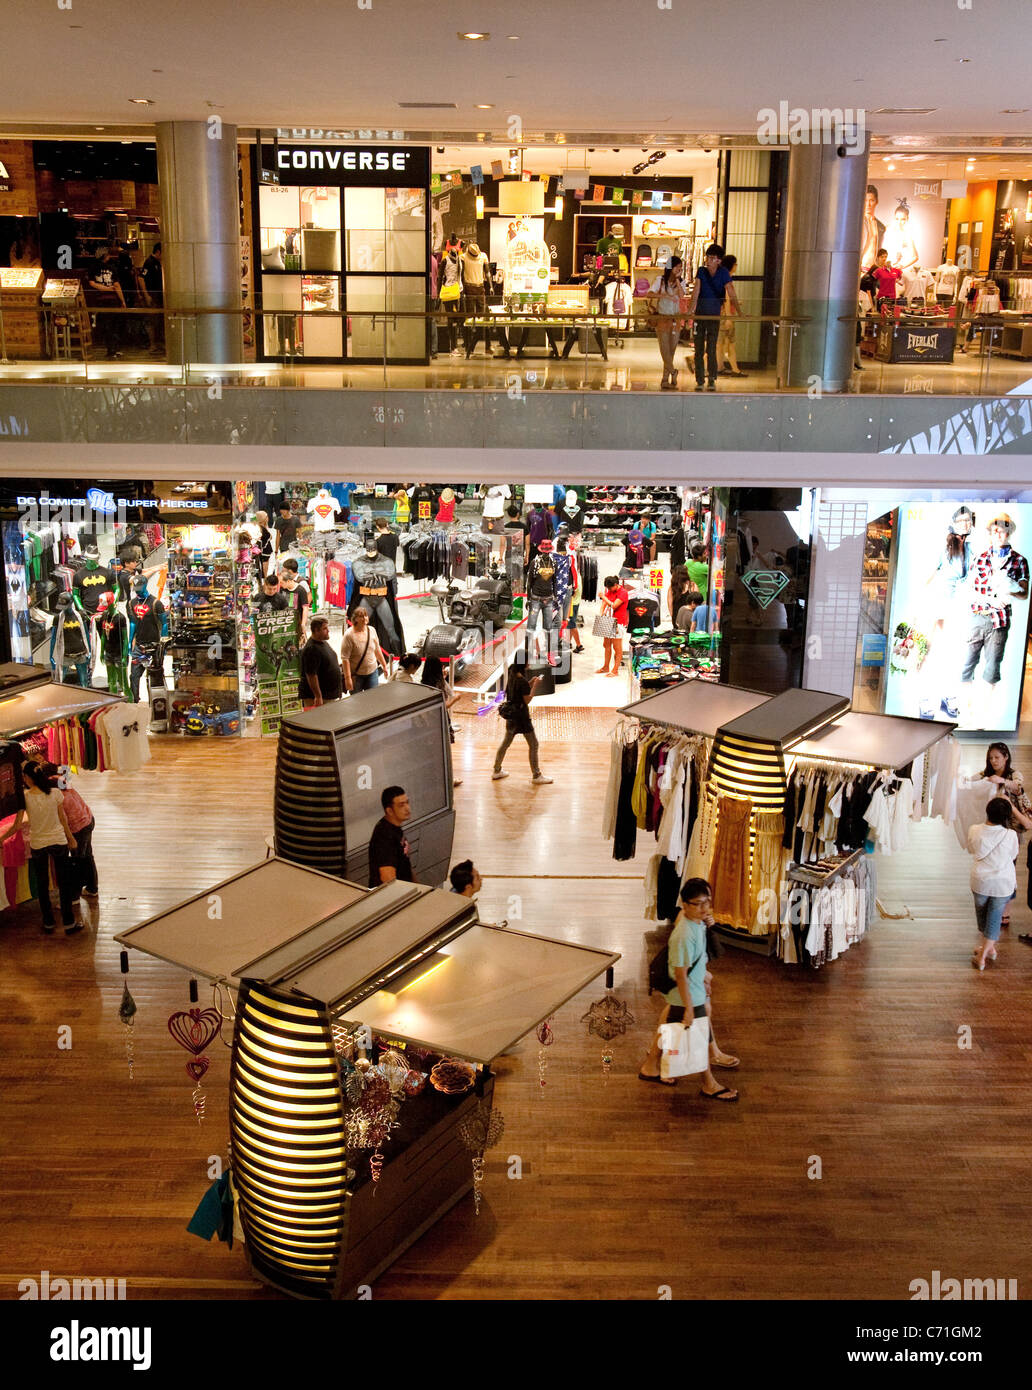 Lo ione Shopping Mall, Orchard Road, Singapore Asia Foto Stock